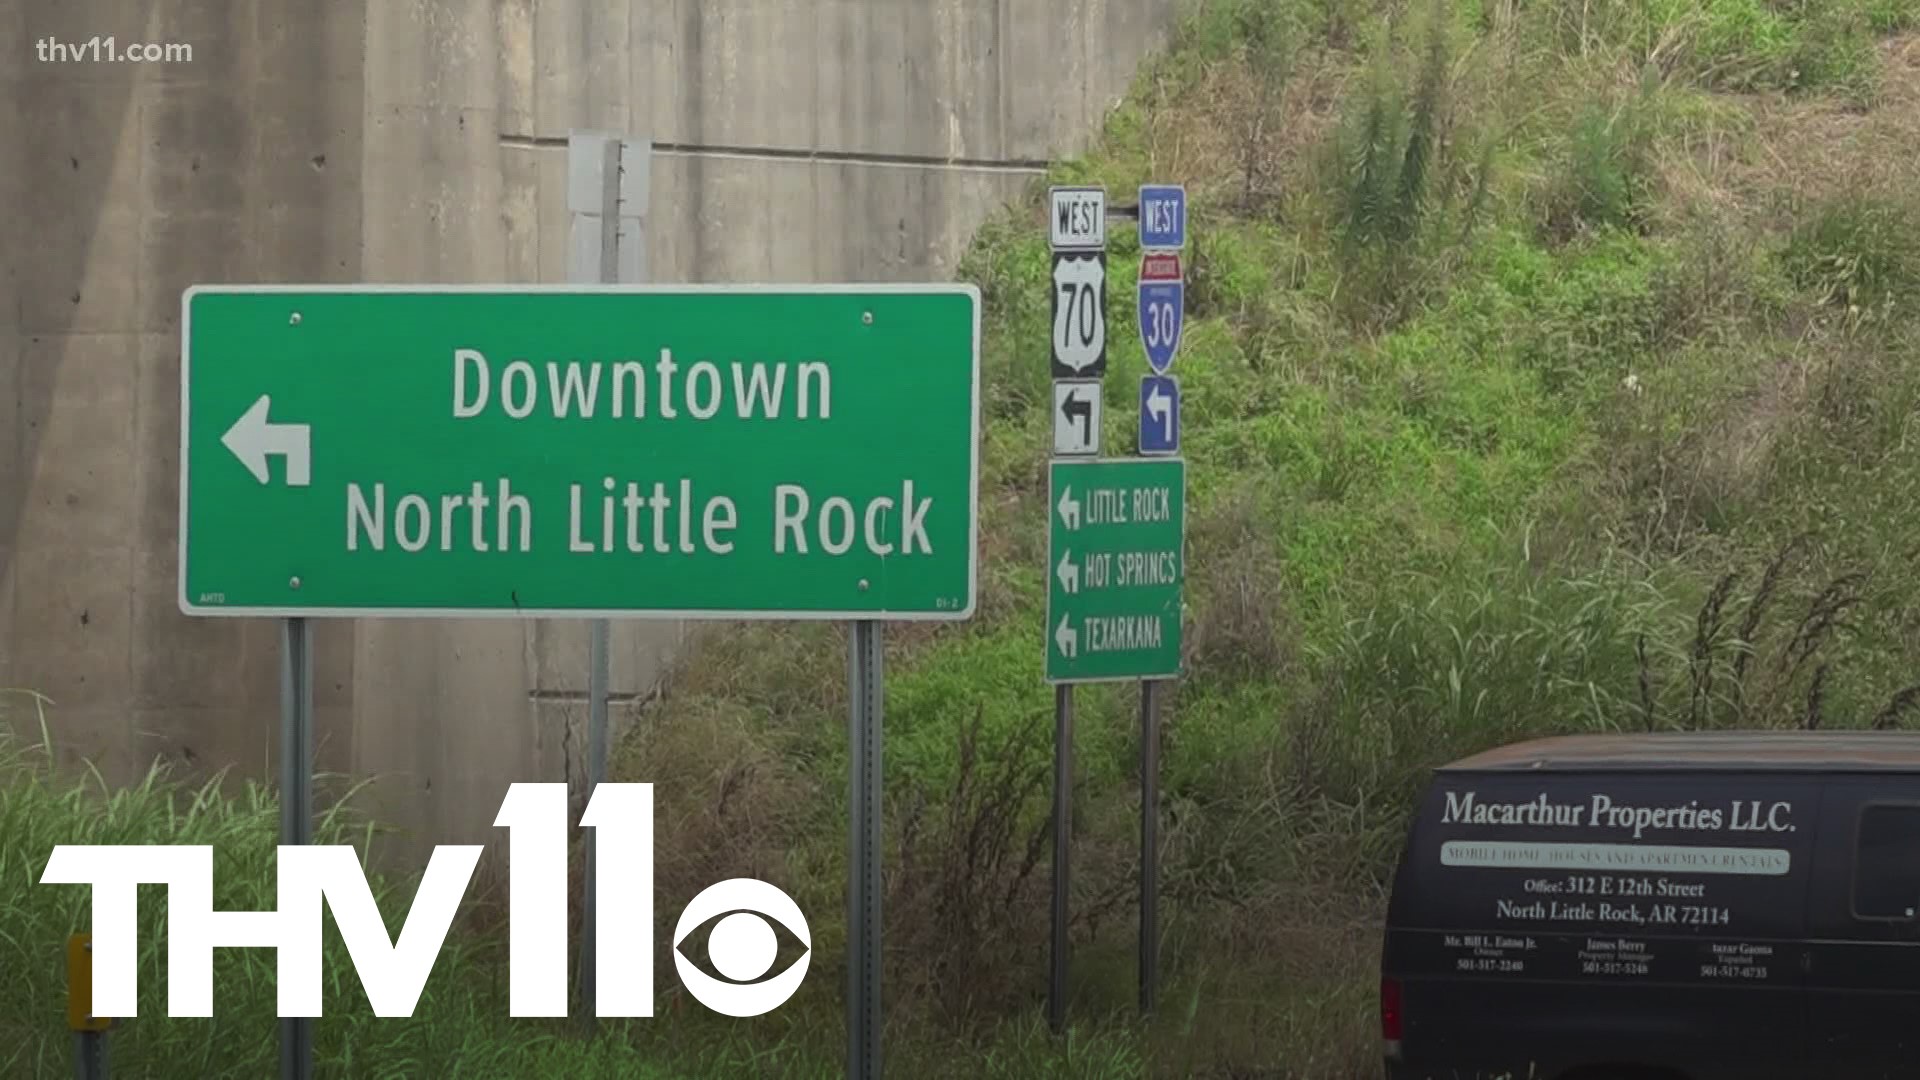 The construction on Interstate 30 in North Little Rock will be going on for the next 18 months.